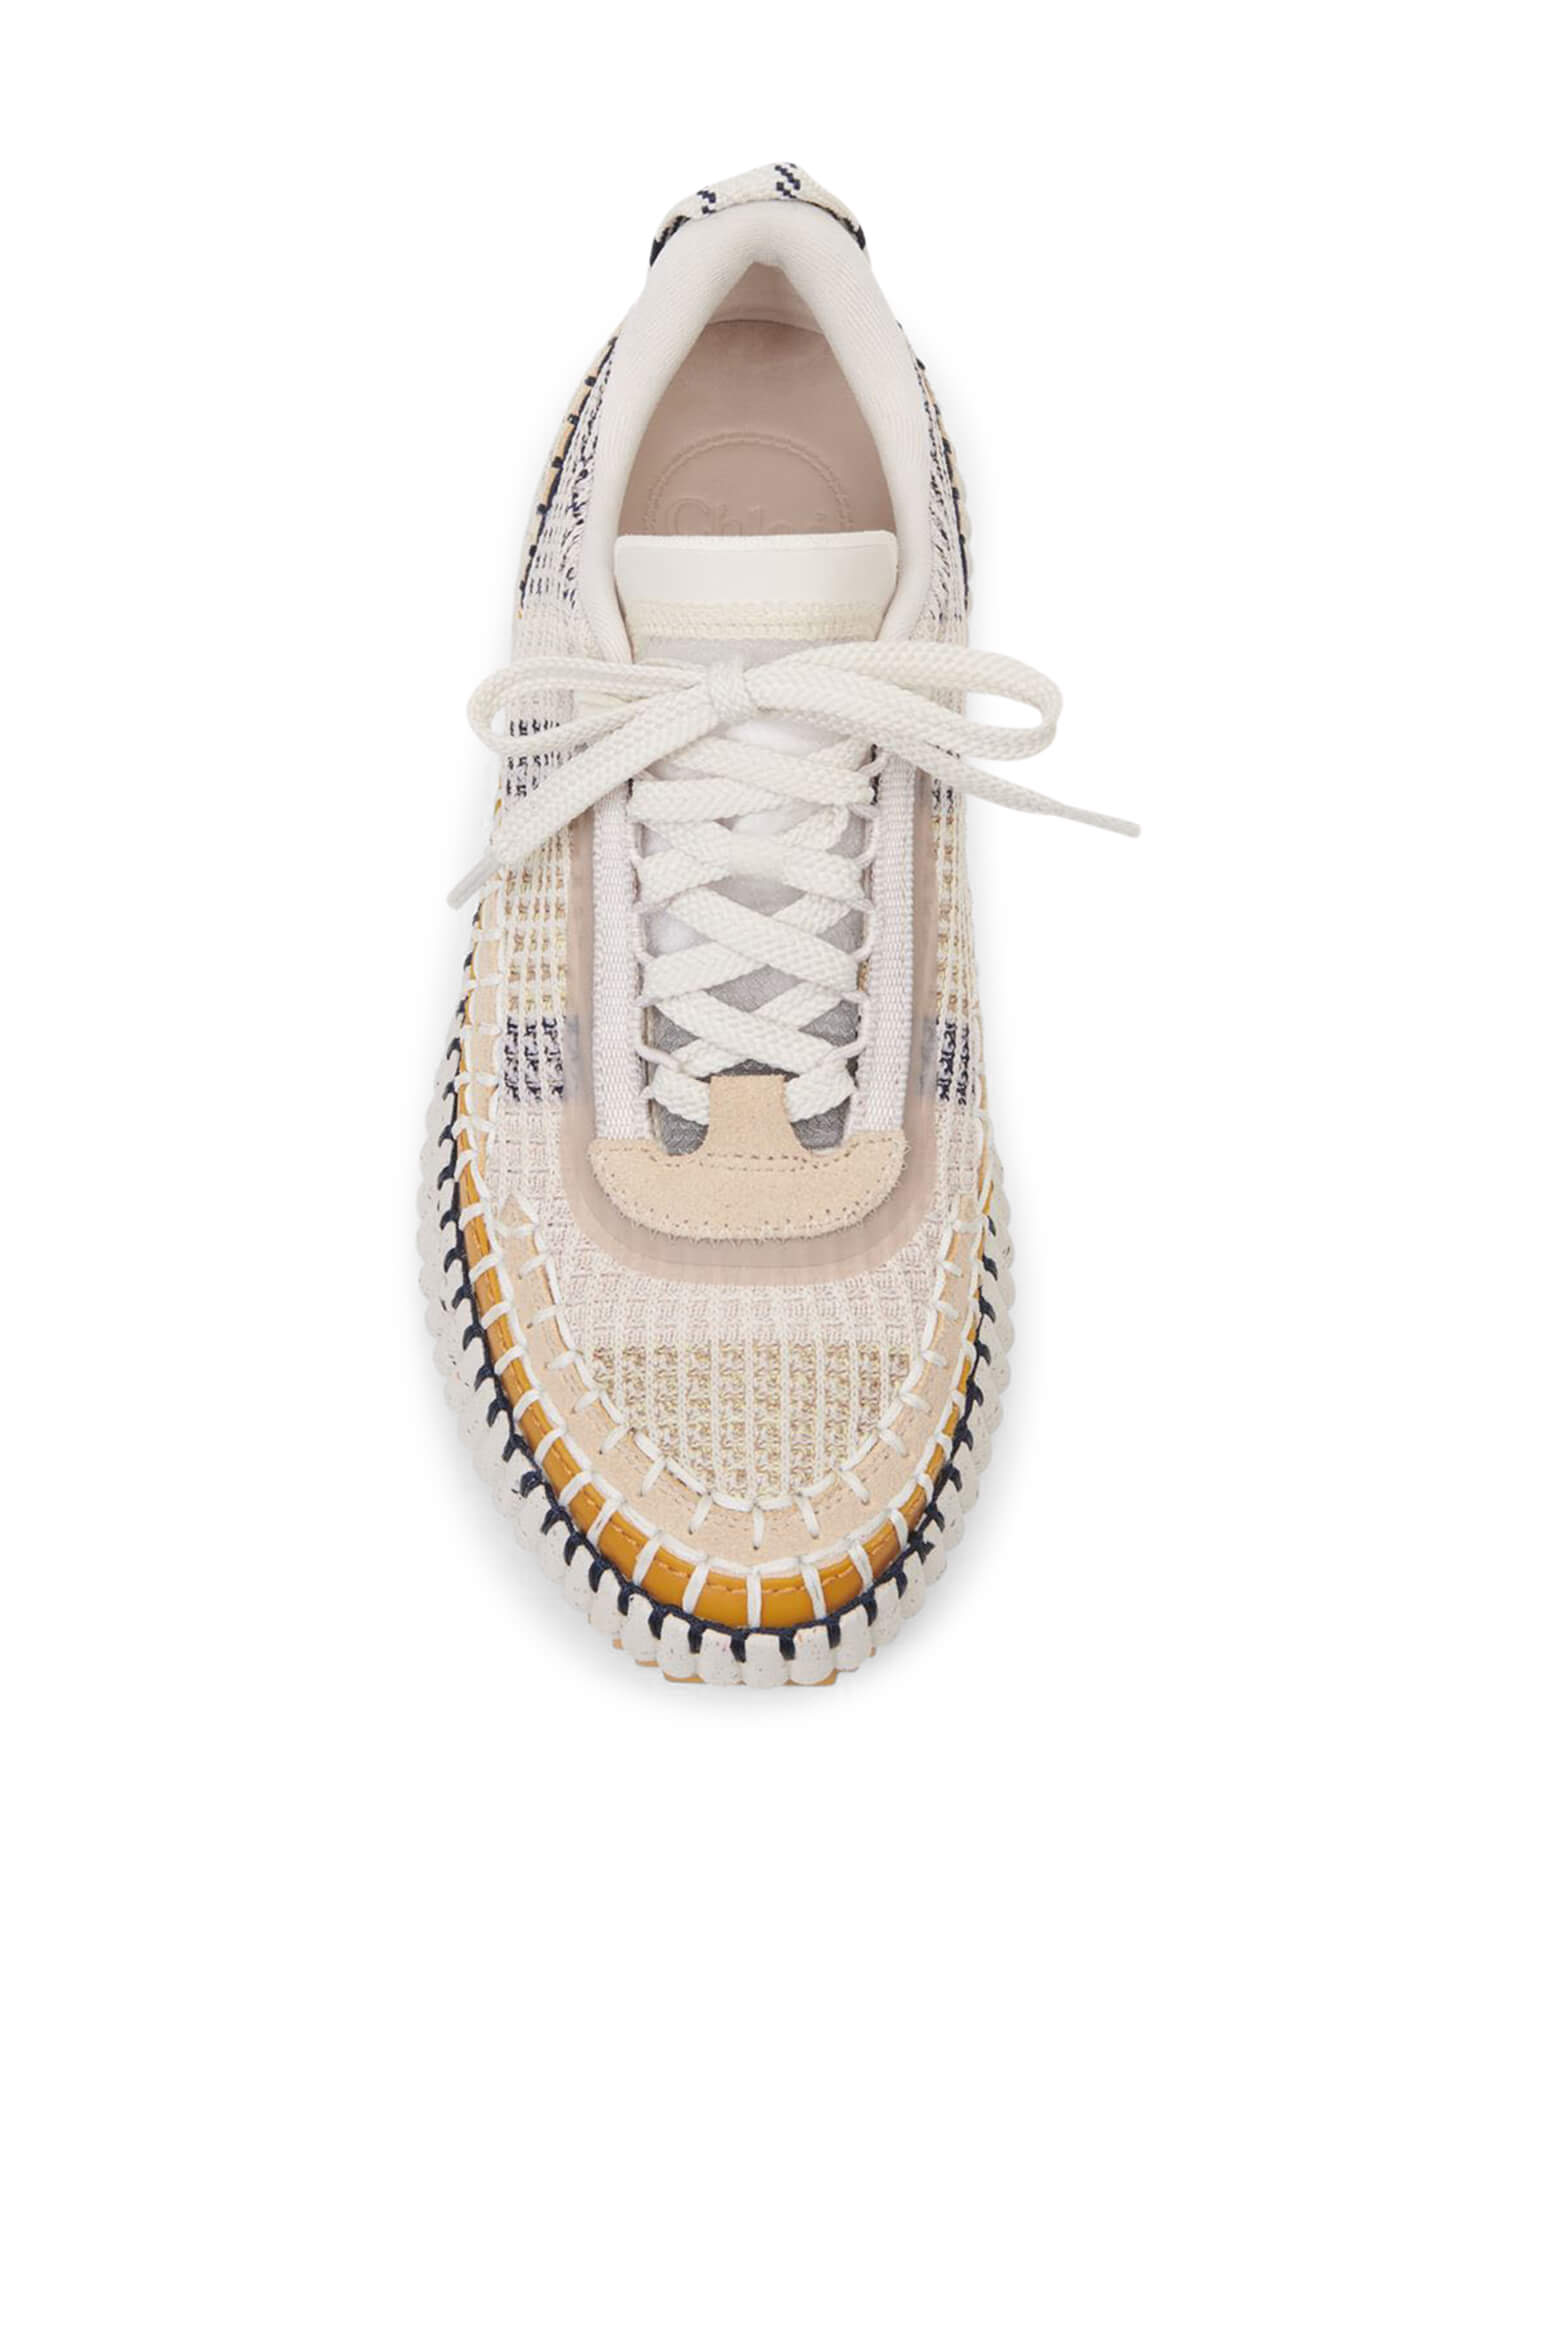 Chloe Nama Sneakers in Biscotti Beige from The New Trend